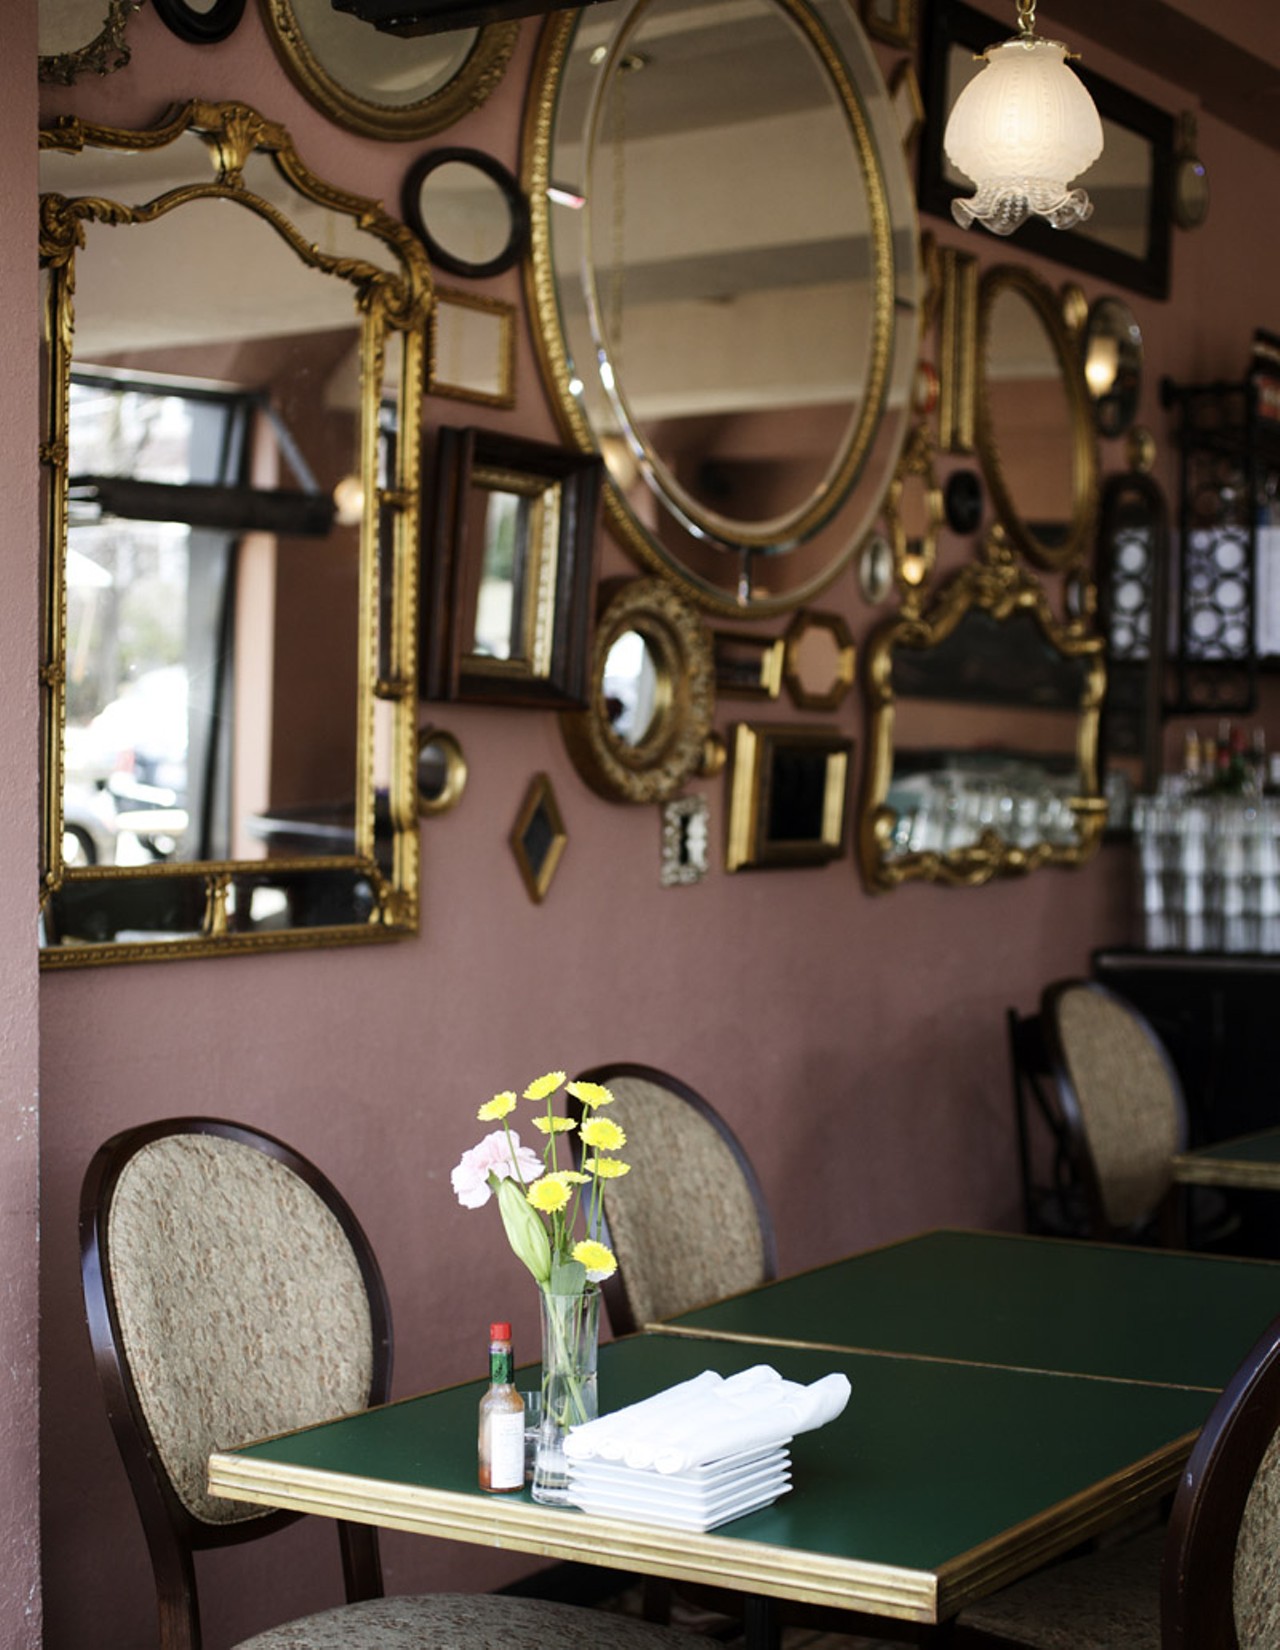 The interior of the Demun Oyster Bar has an intimate Parisian feel. The floor (vintage circa 1880) was imported from France, while the mirrors and bar are local touches.